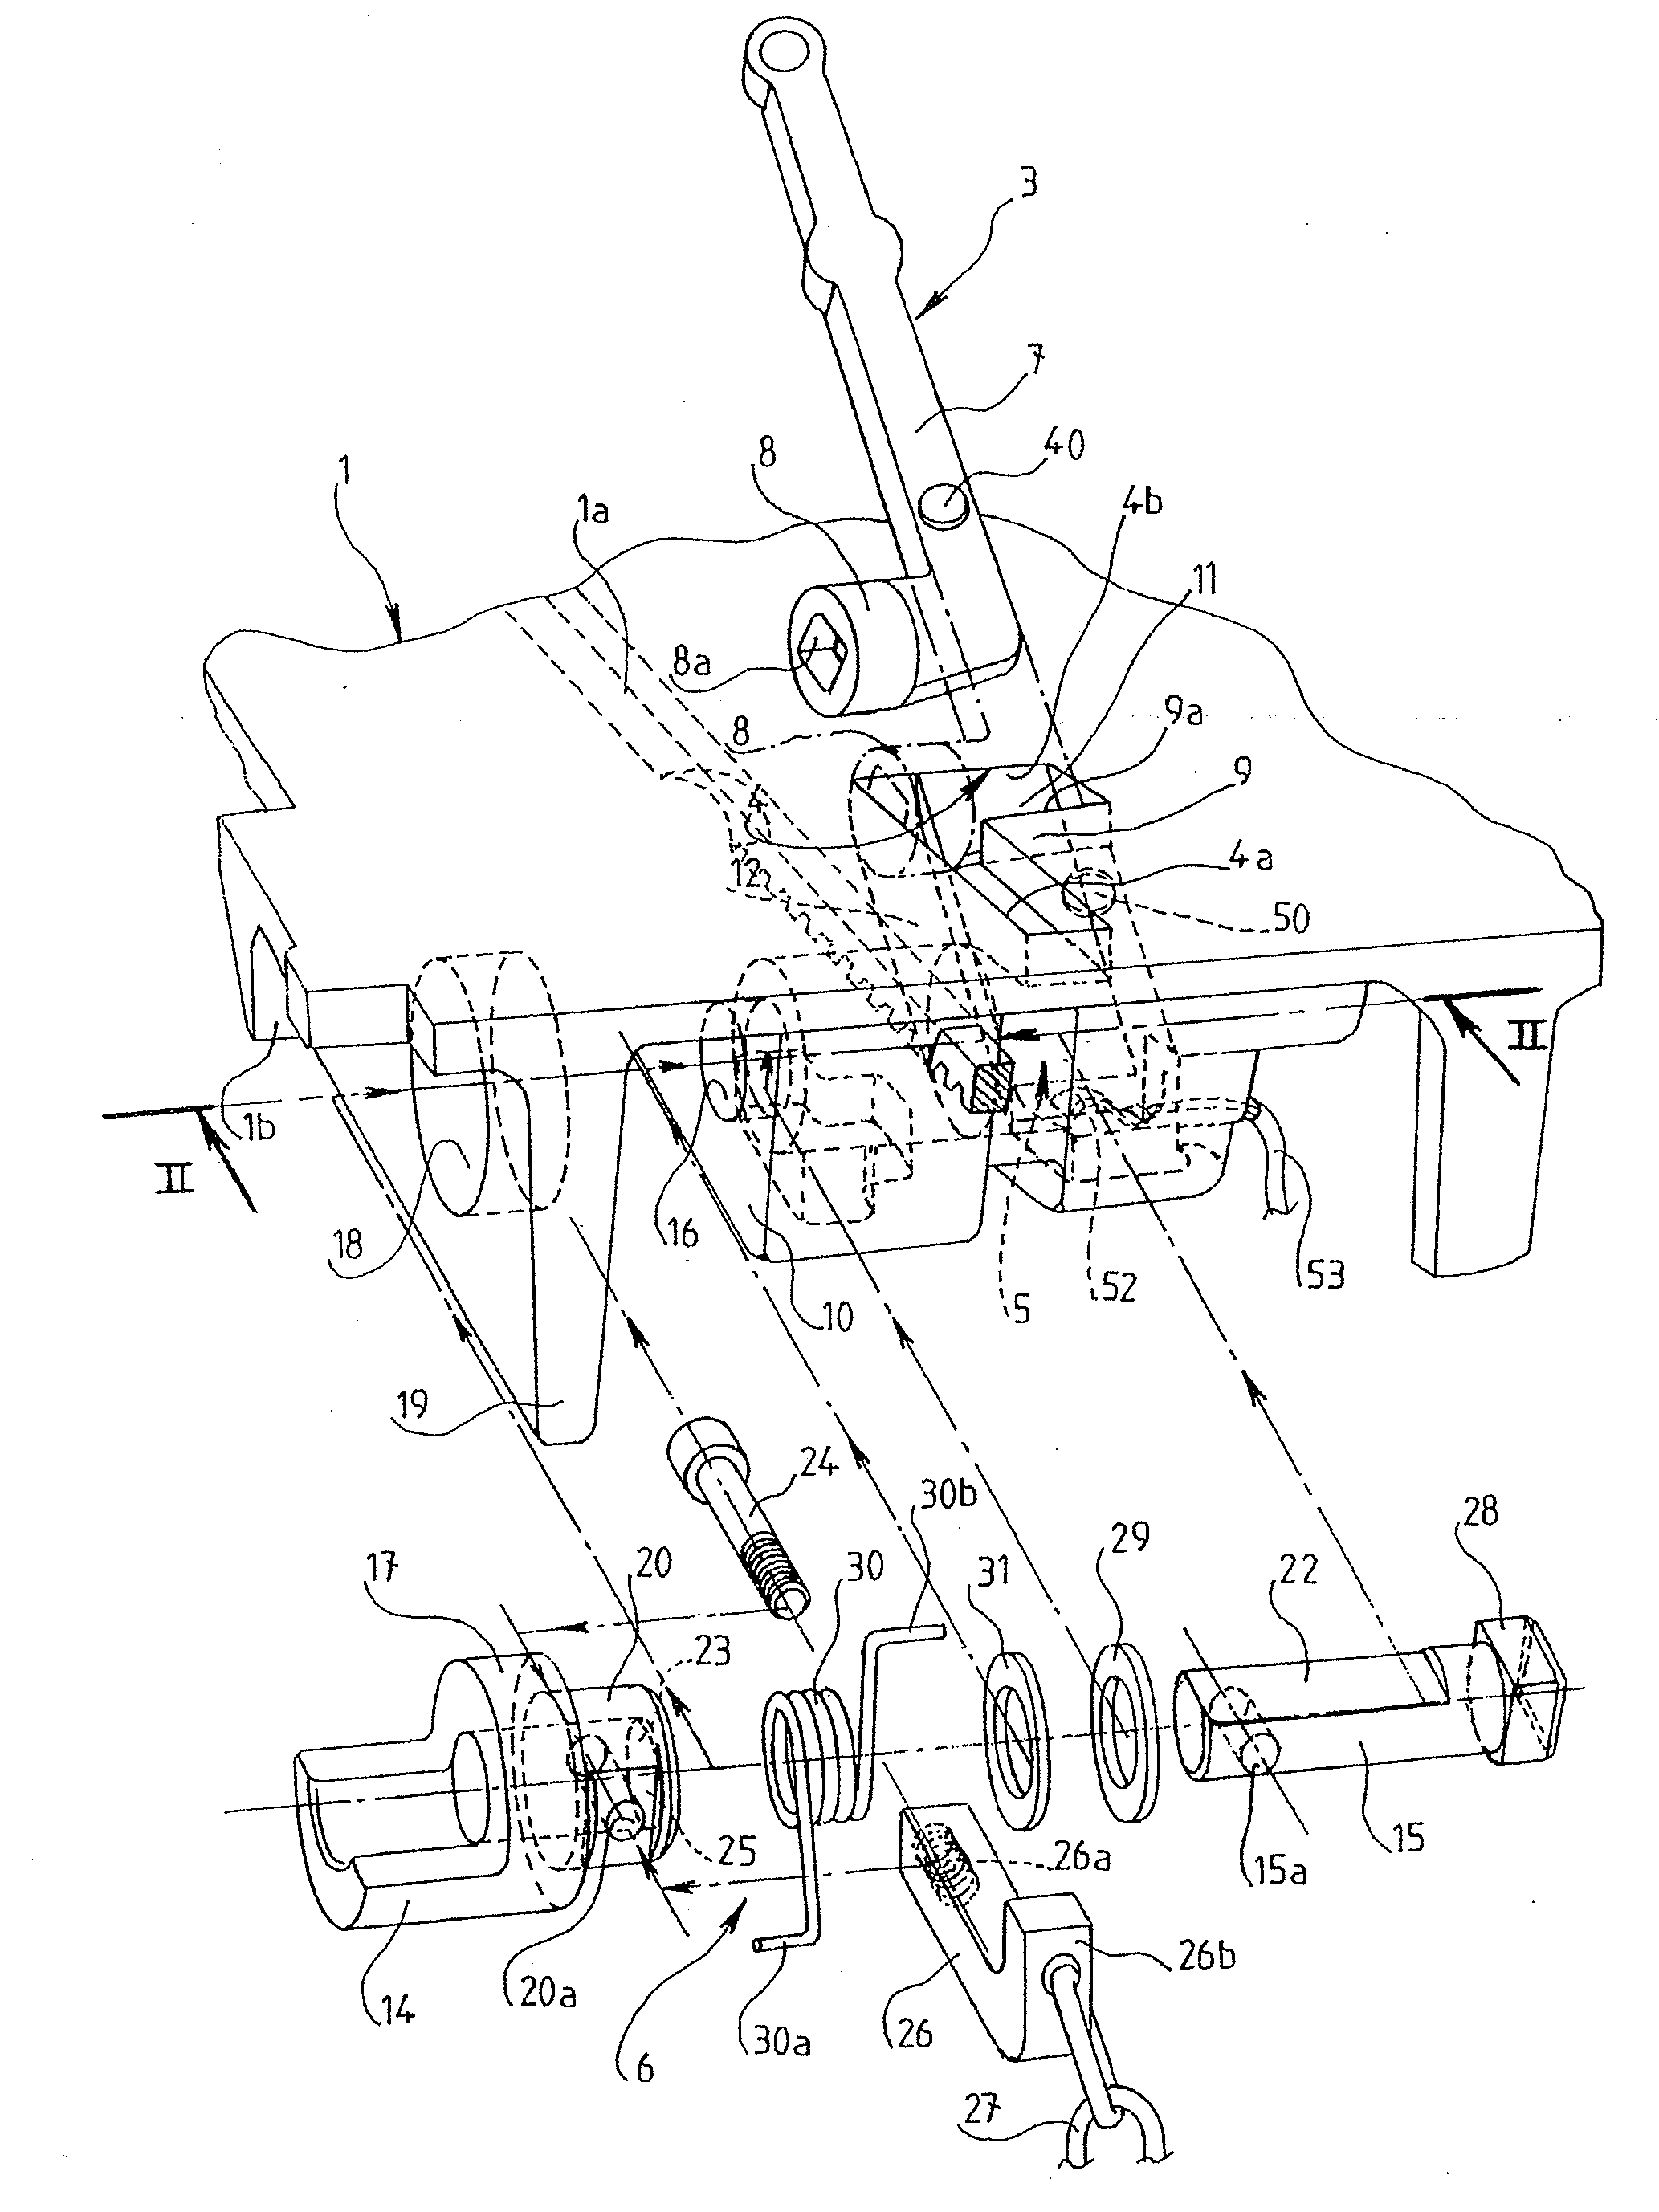 Device for locking and unlocking a plug on a frame using a wrench